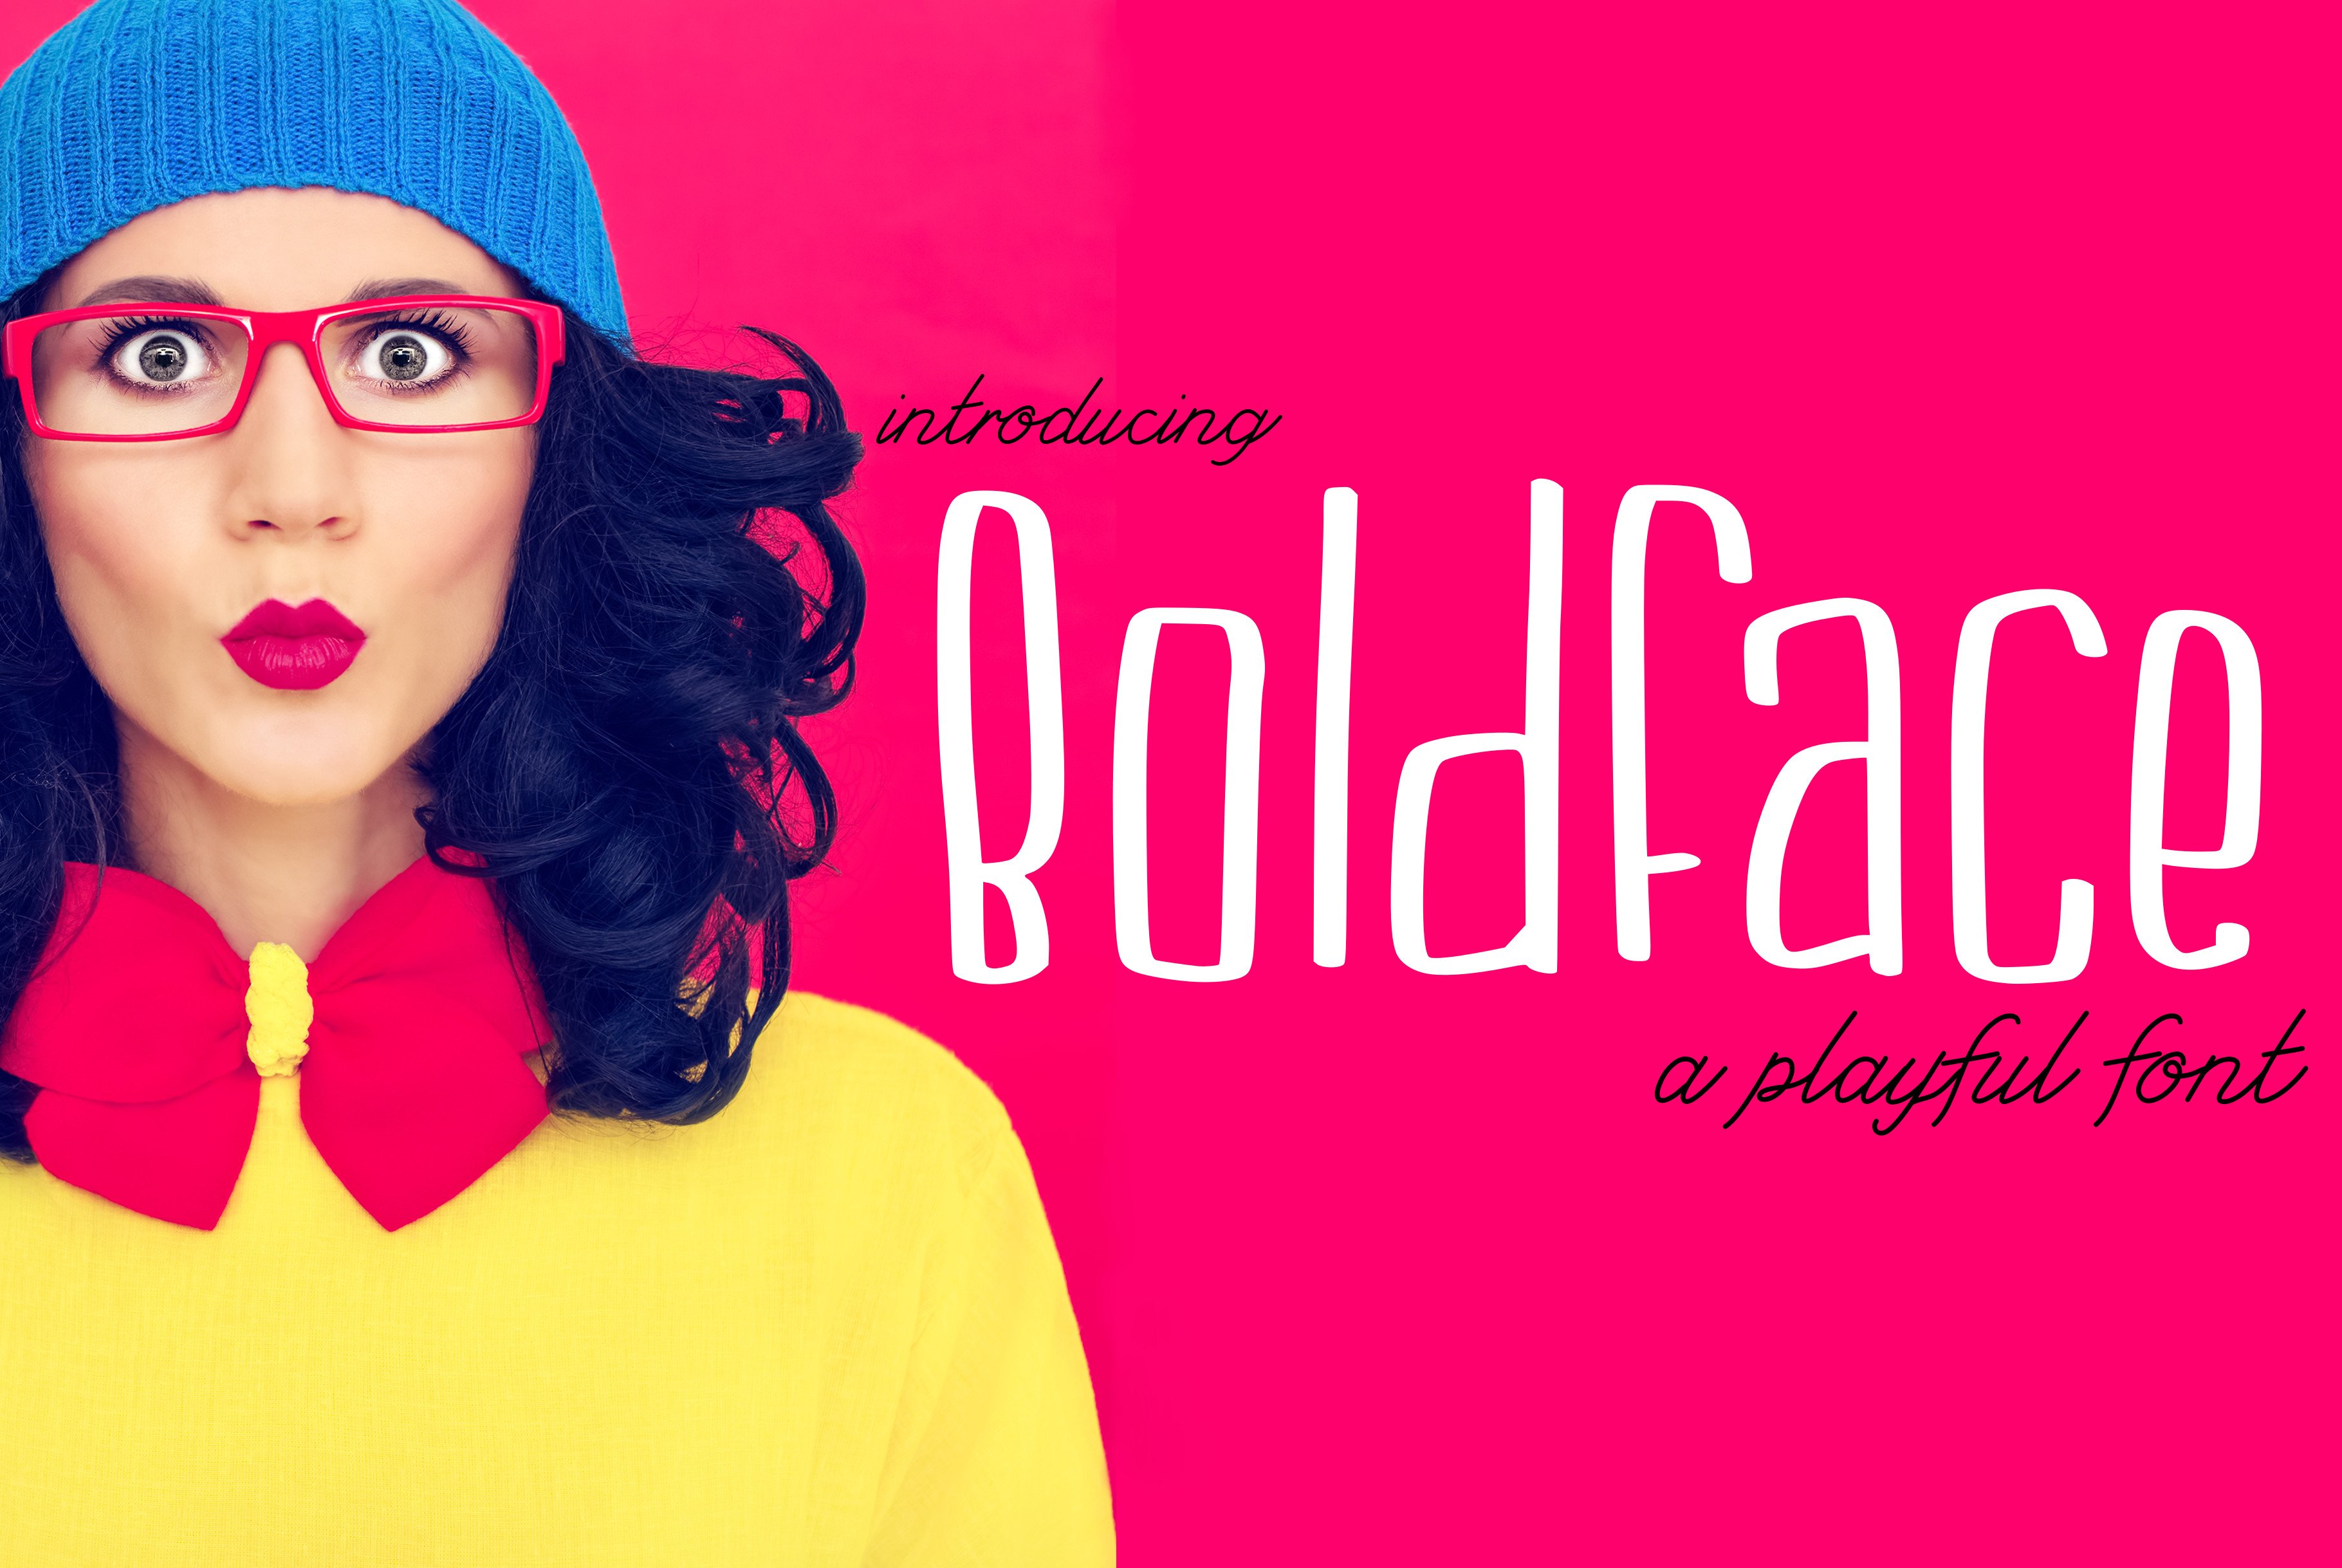 Boldface cover image.